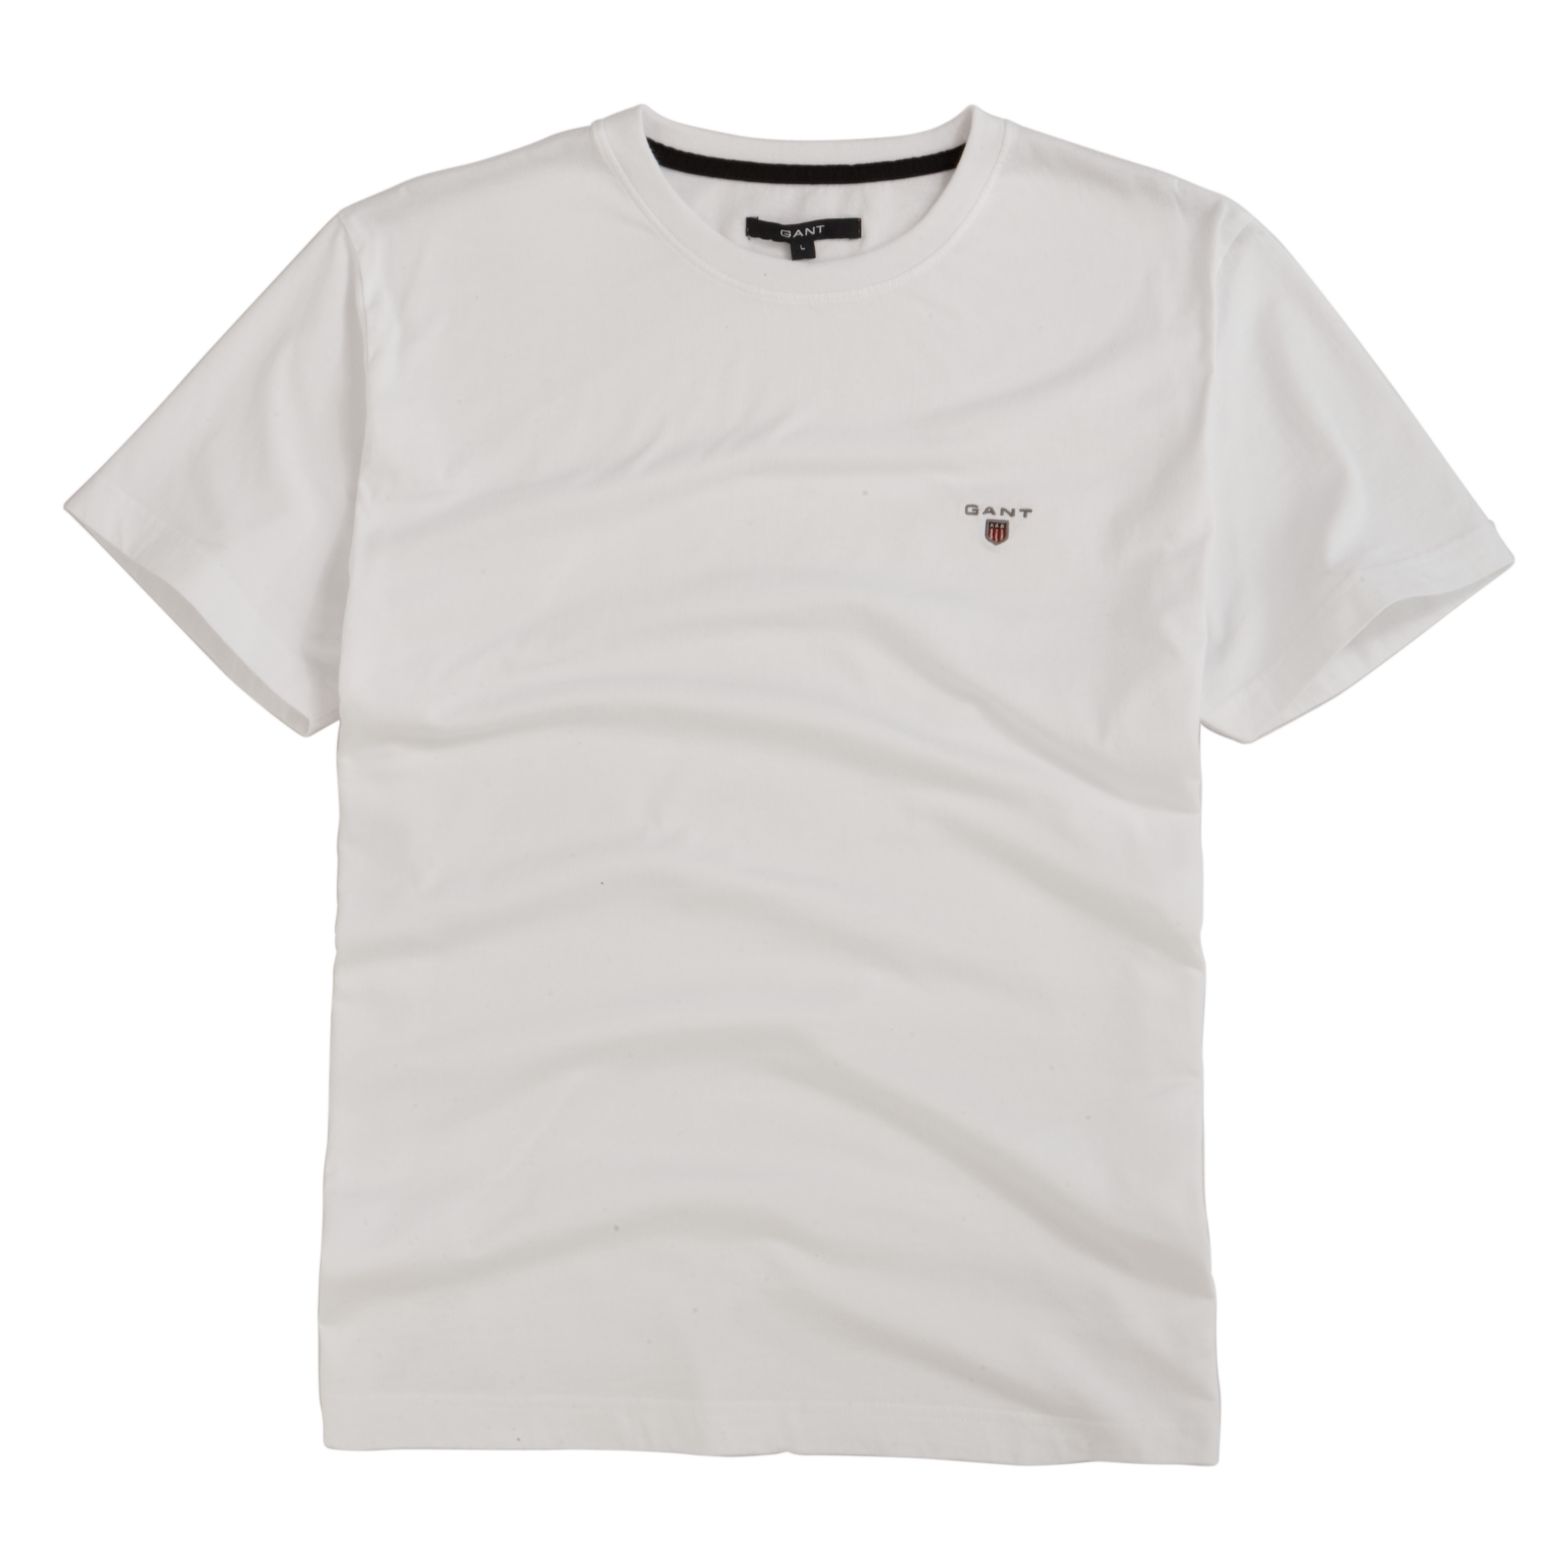 Short Sleeve Solid T-Shirt, White